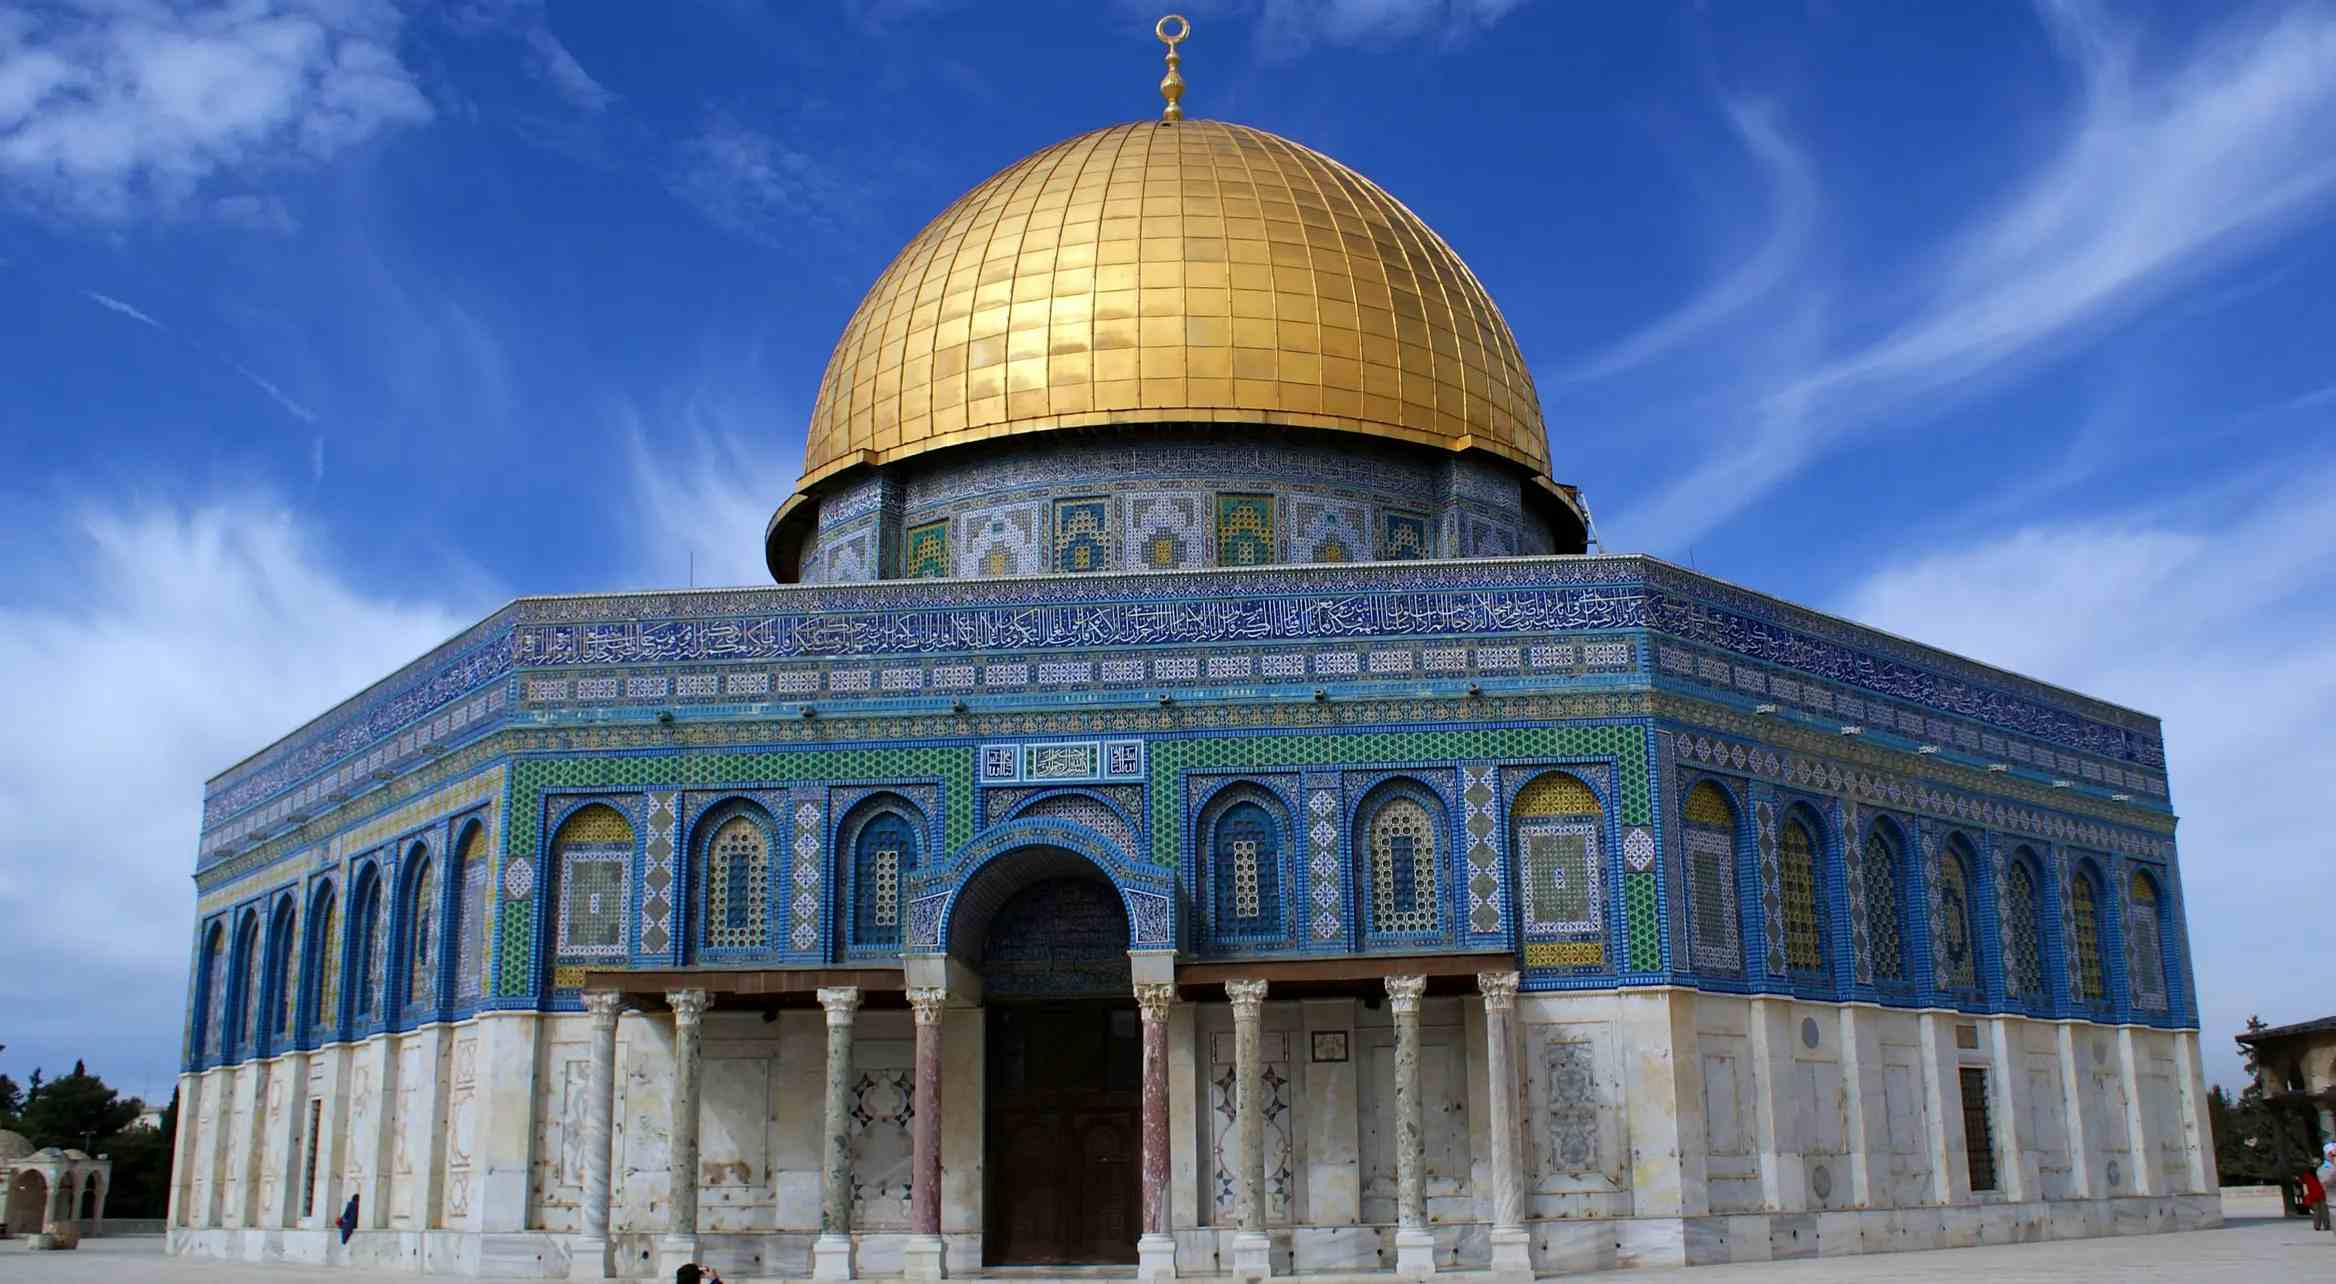 Dome of the Rock image